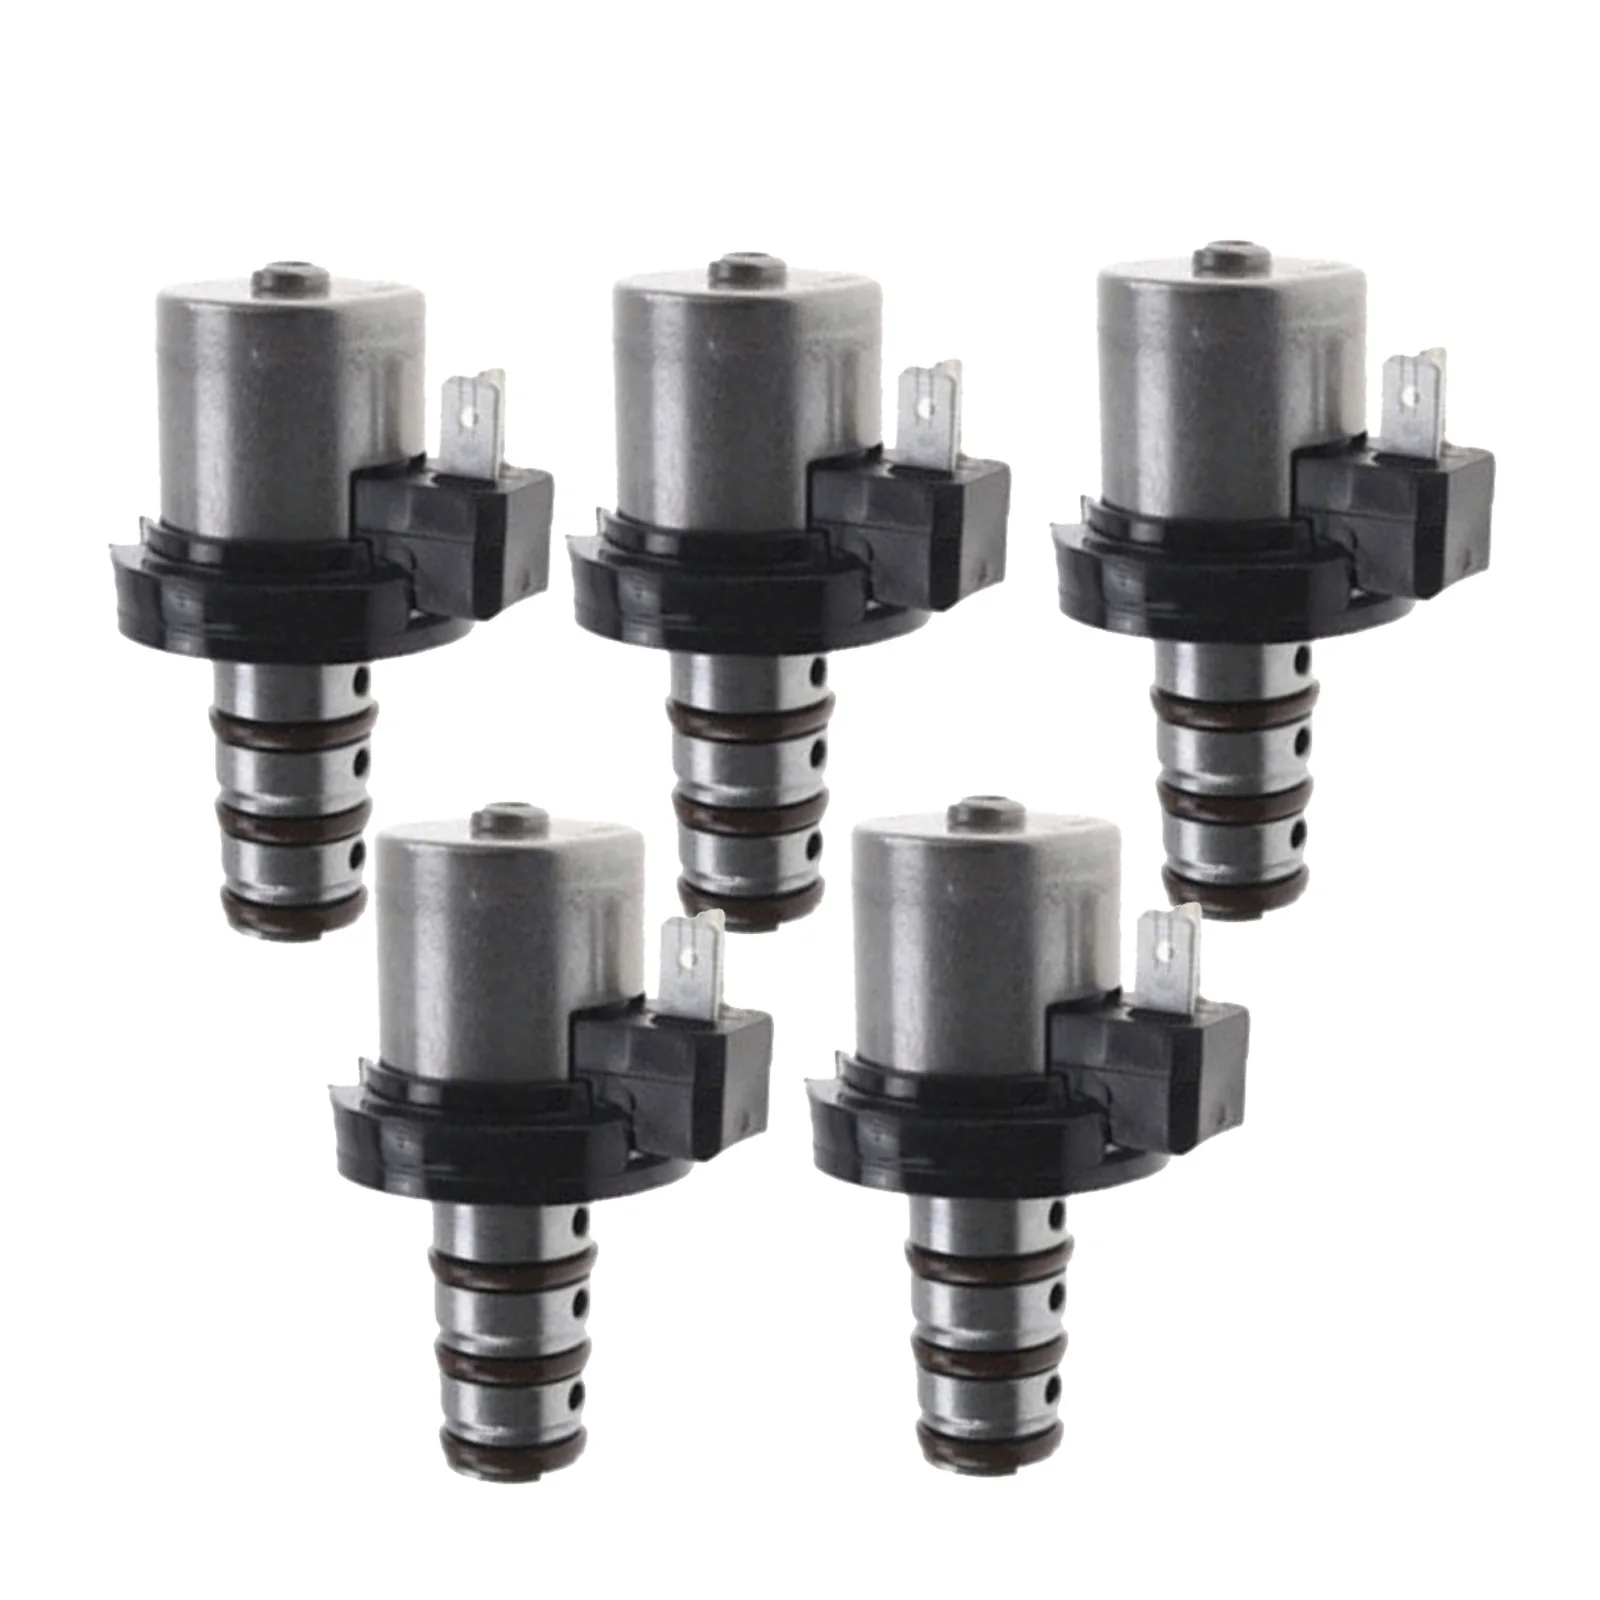 5-Pack Transmission Solenoid Set 8981 Replacement for for